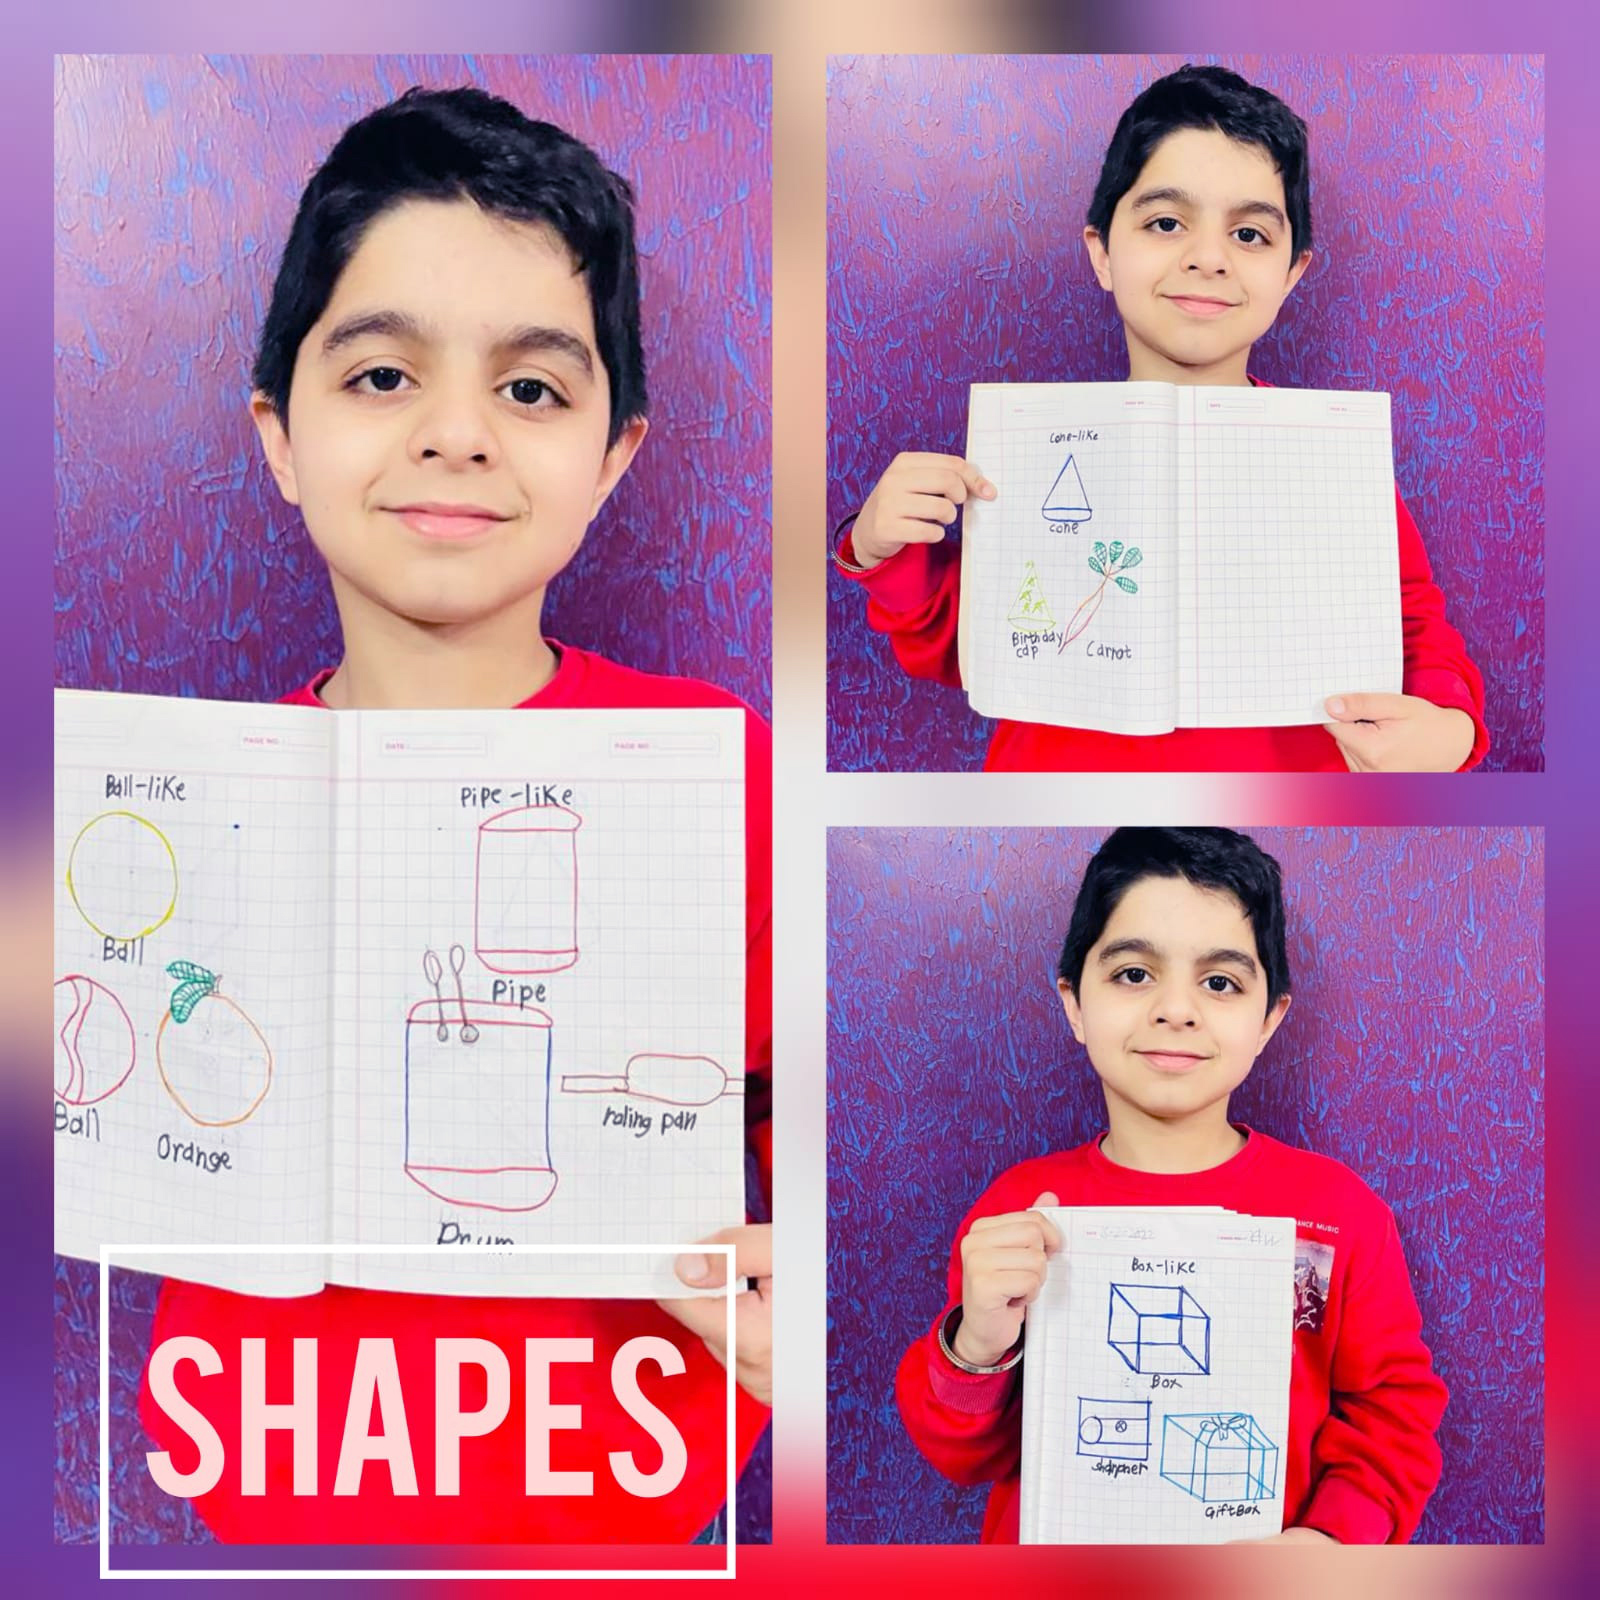 Presidium Pitampura, STUDENTS LEARN TO IDENTIFY & DESCRIBE DIFFERENT TYPES OF SHAPES